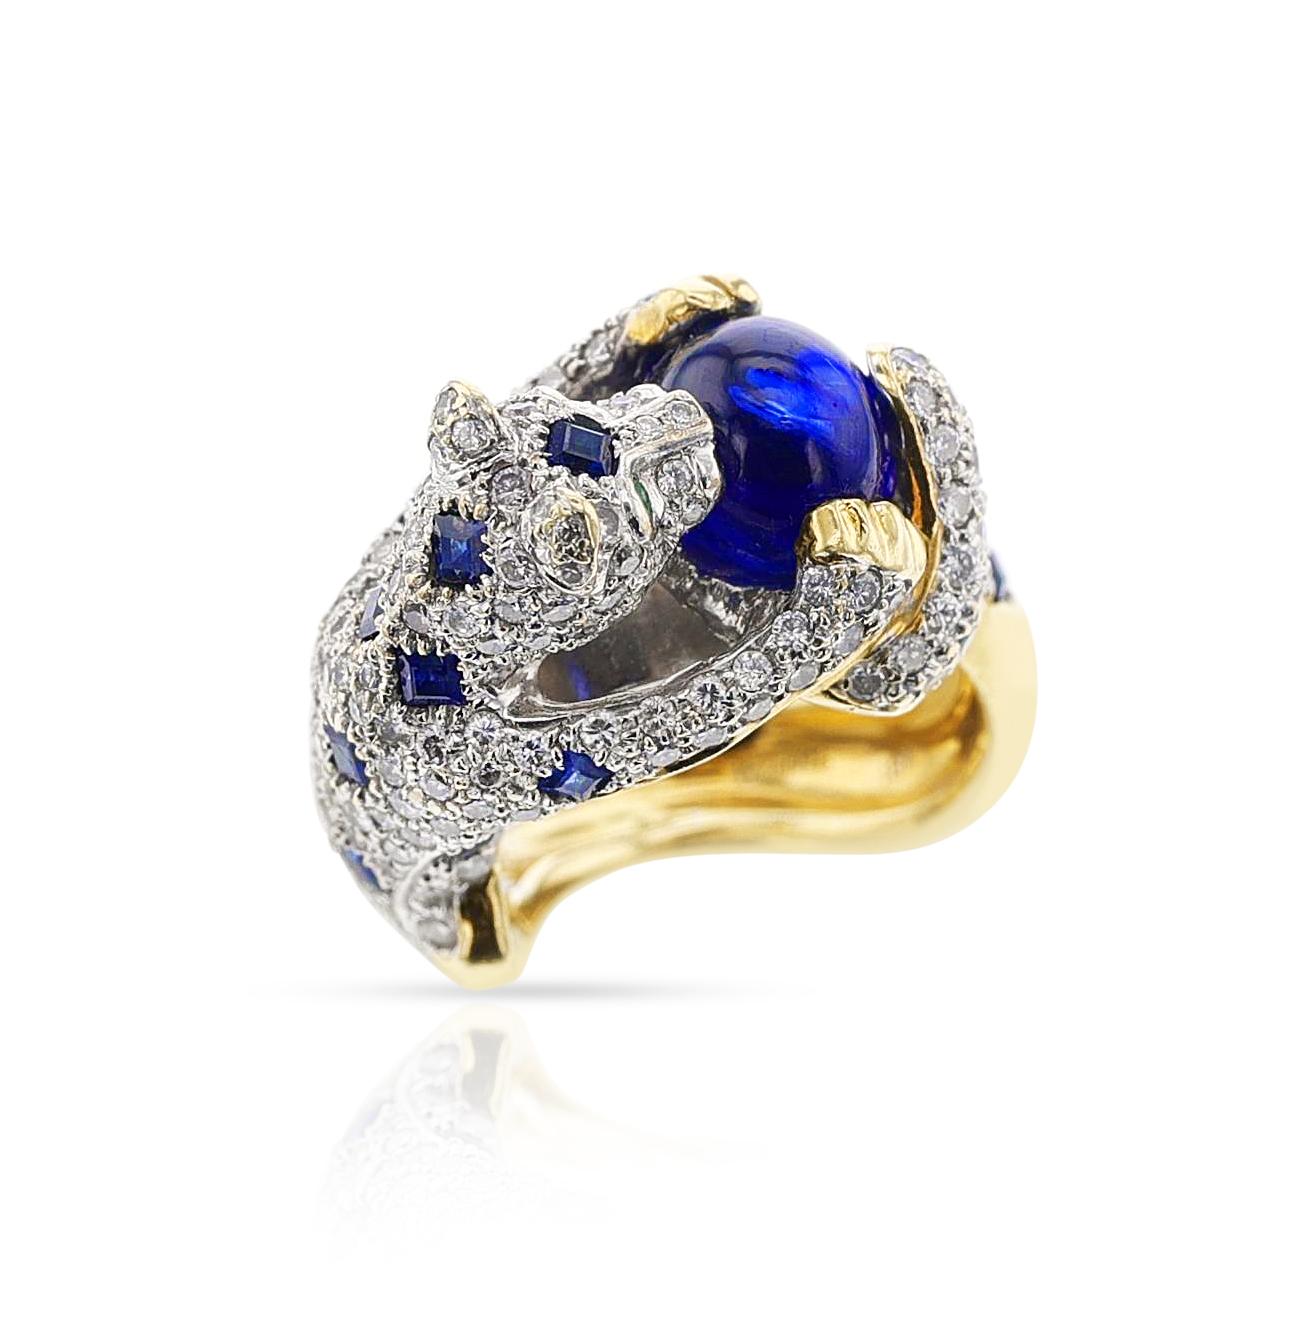 Round Cut Diamond, Sapphire, and Emerald Panther Ring, 18 Karat Gold For Sale